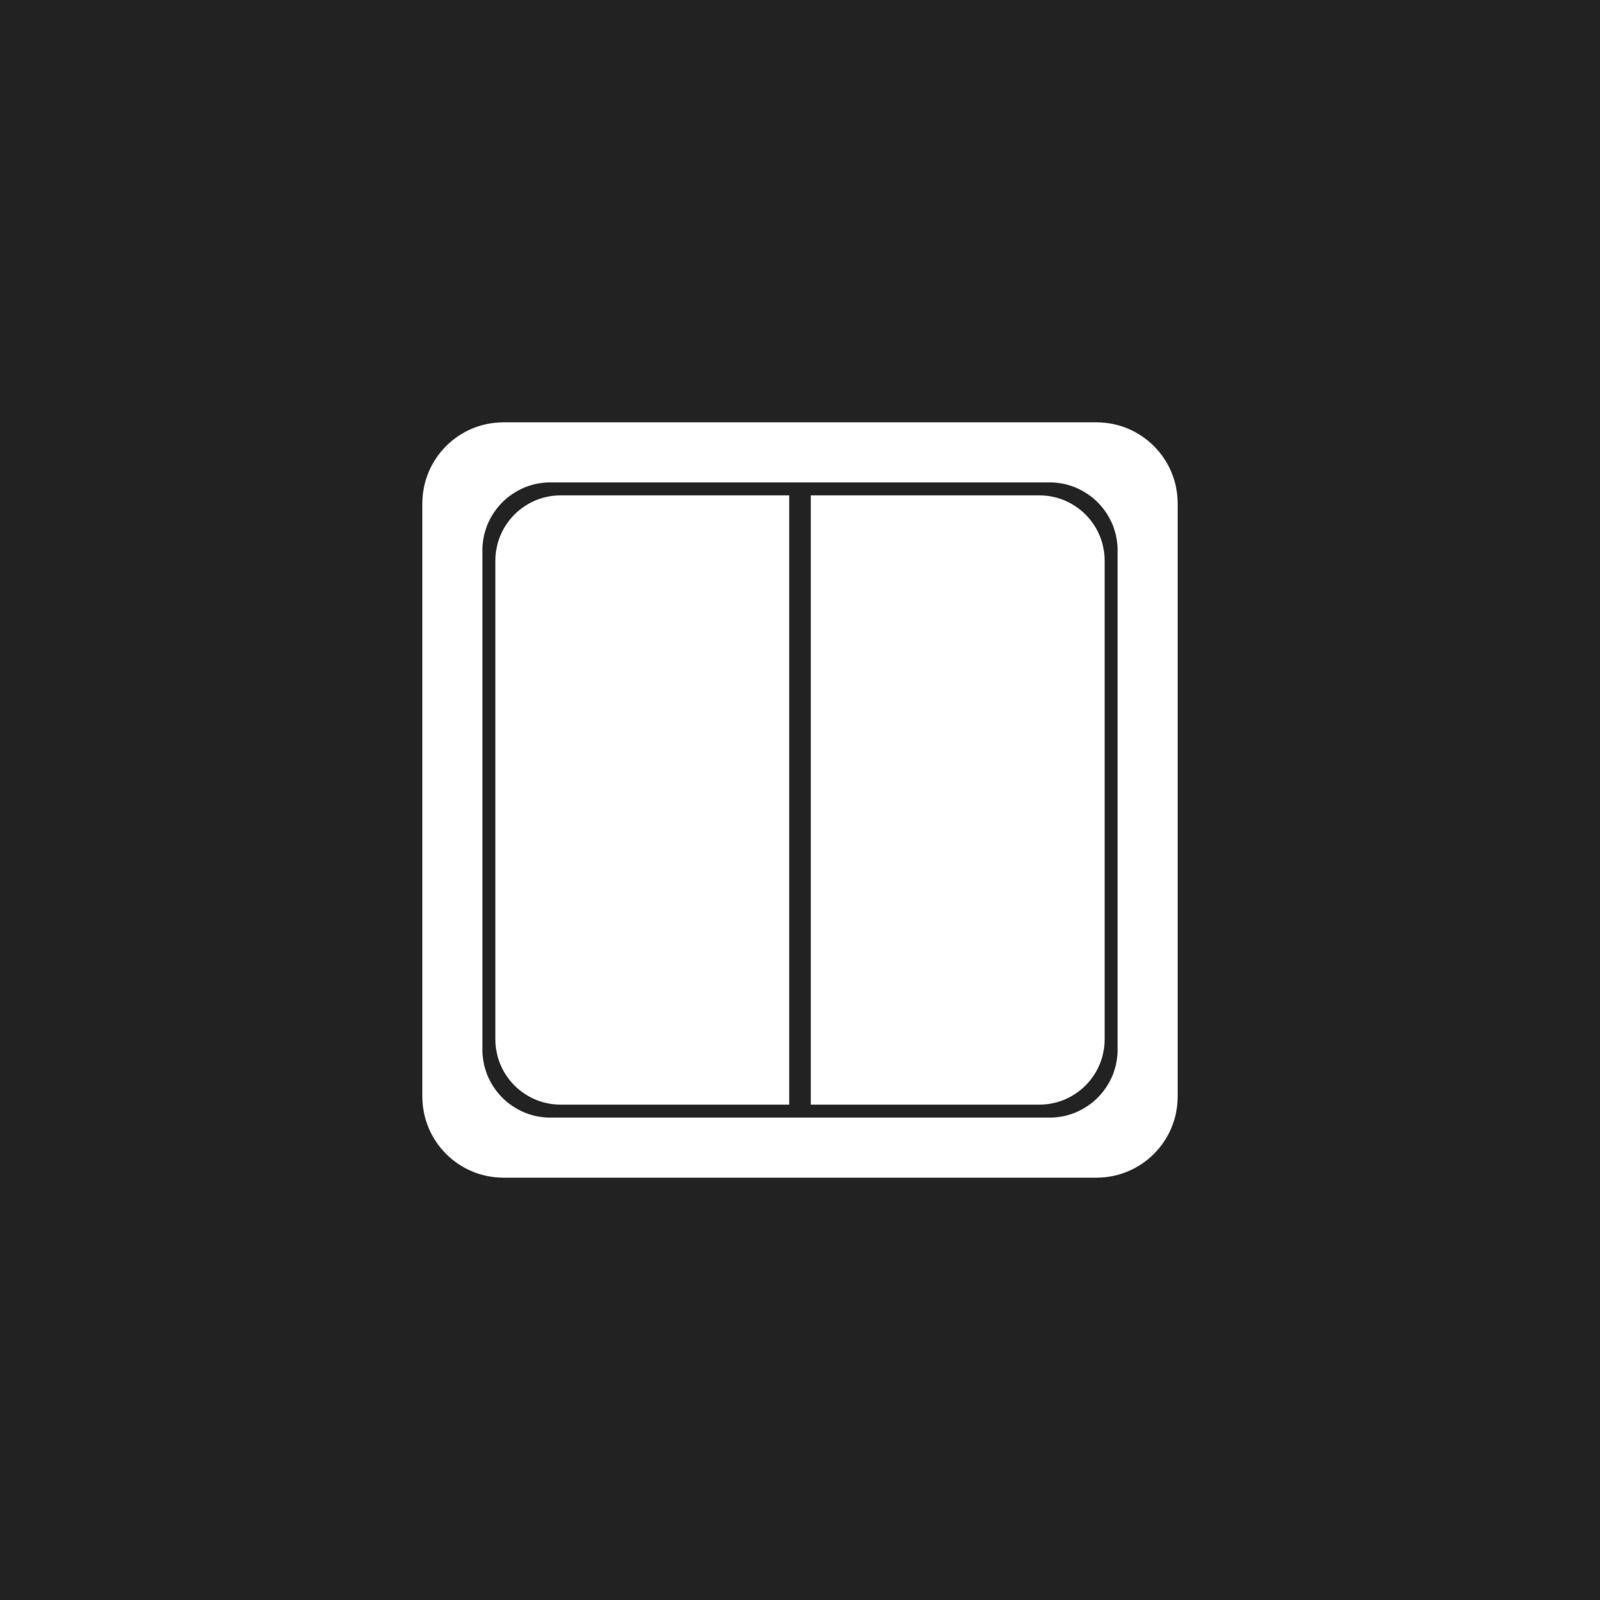 Electric light switch icon. Electric switch flat vector illustration on black background. by LysenkoA